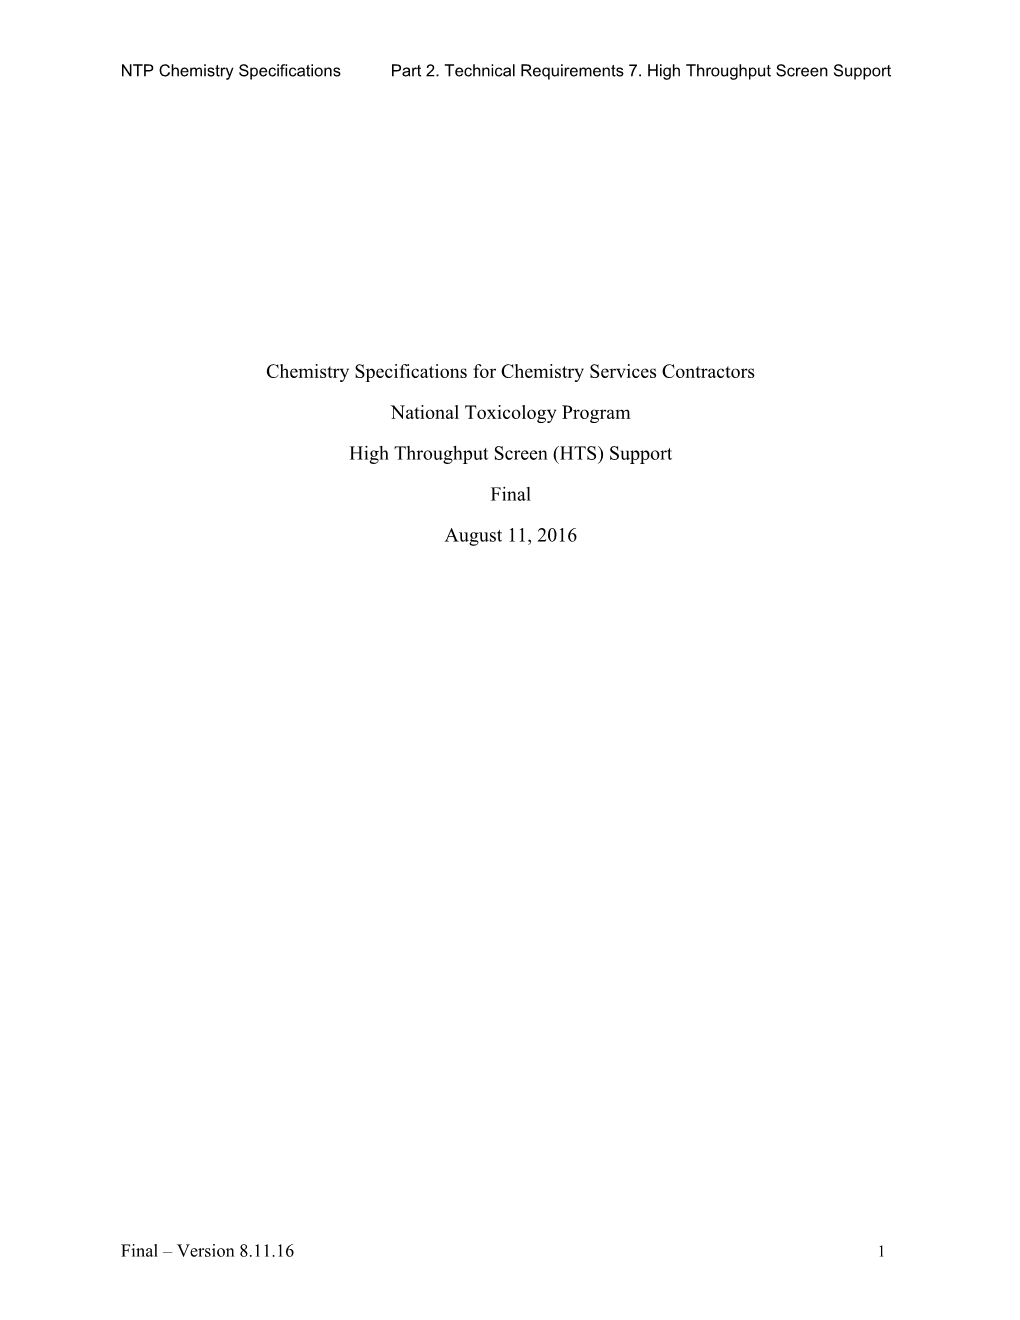 NTP Chemistry Specifications Section 7. High Throughput Screen Support